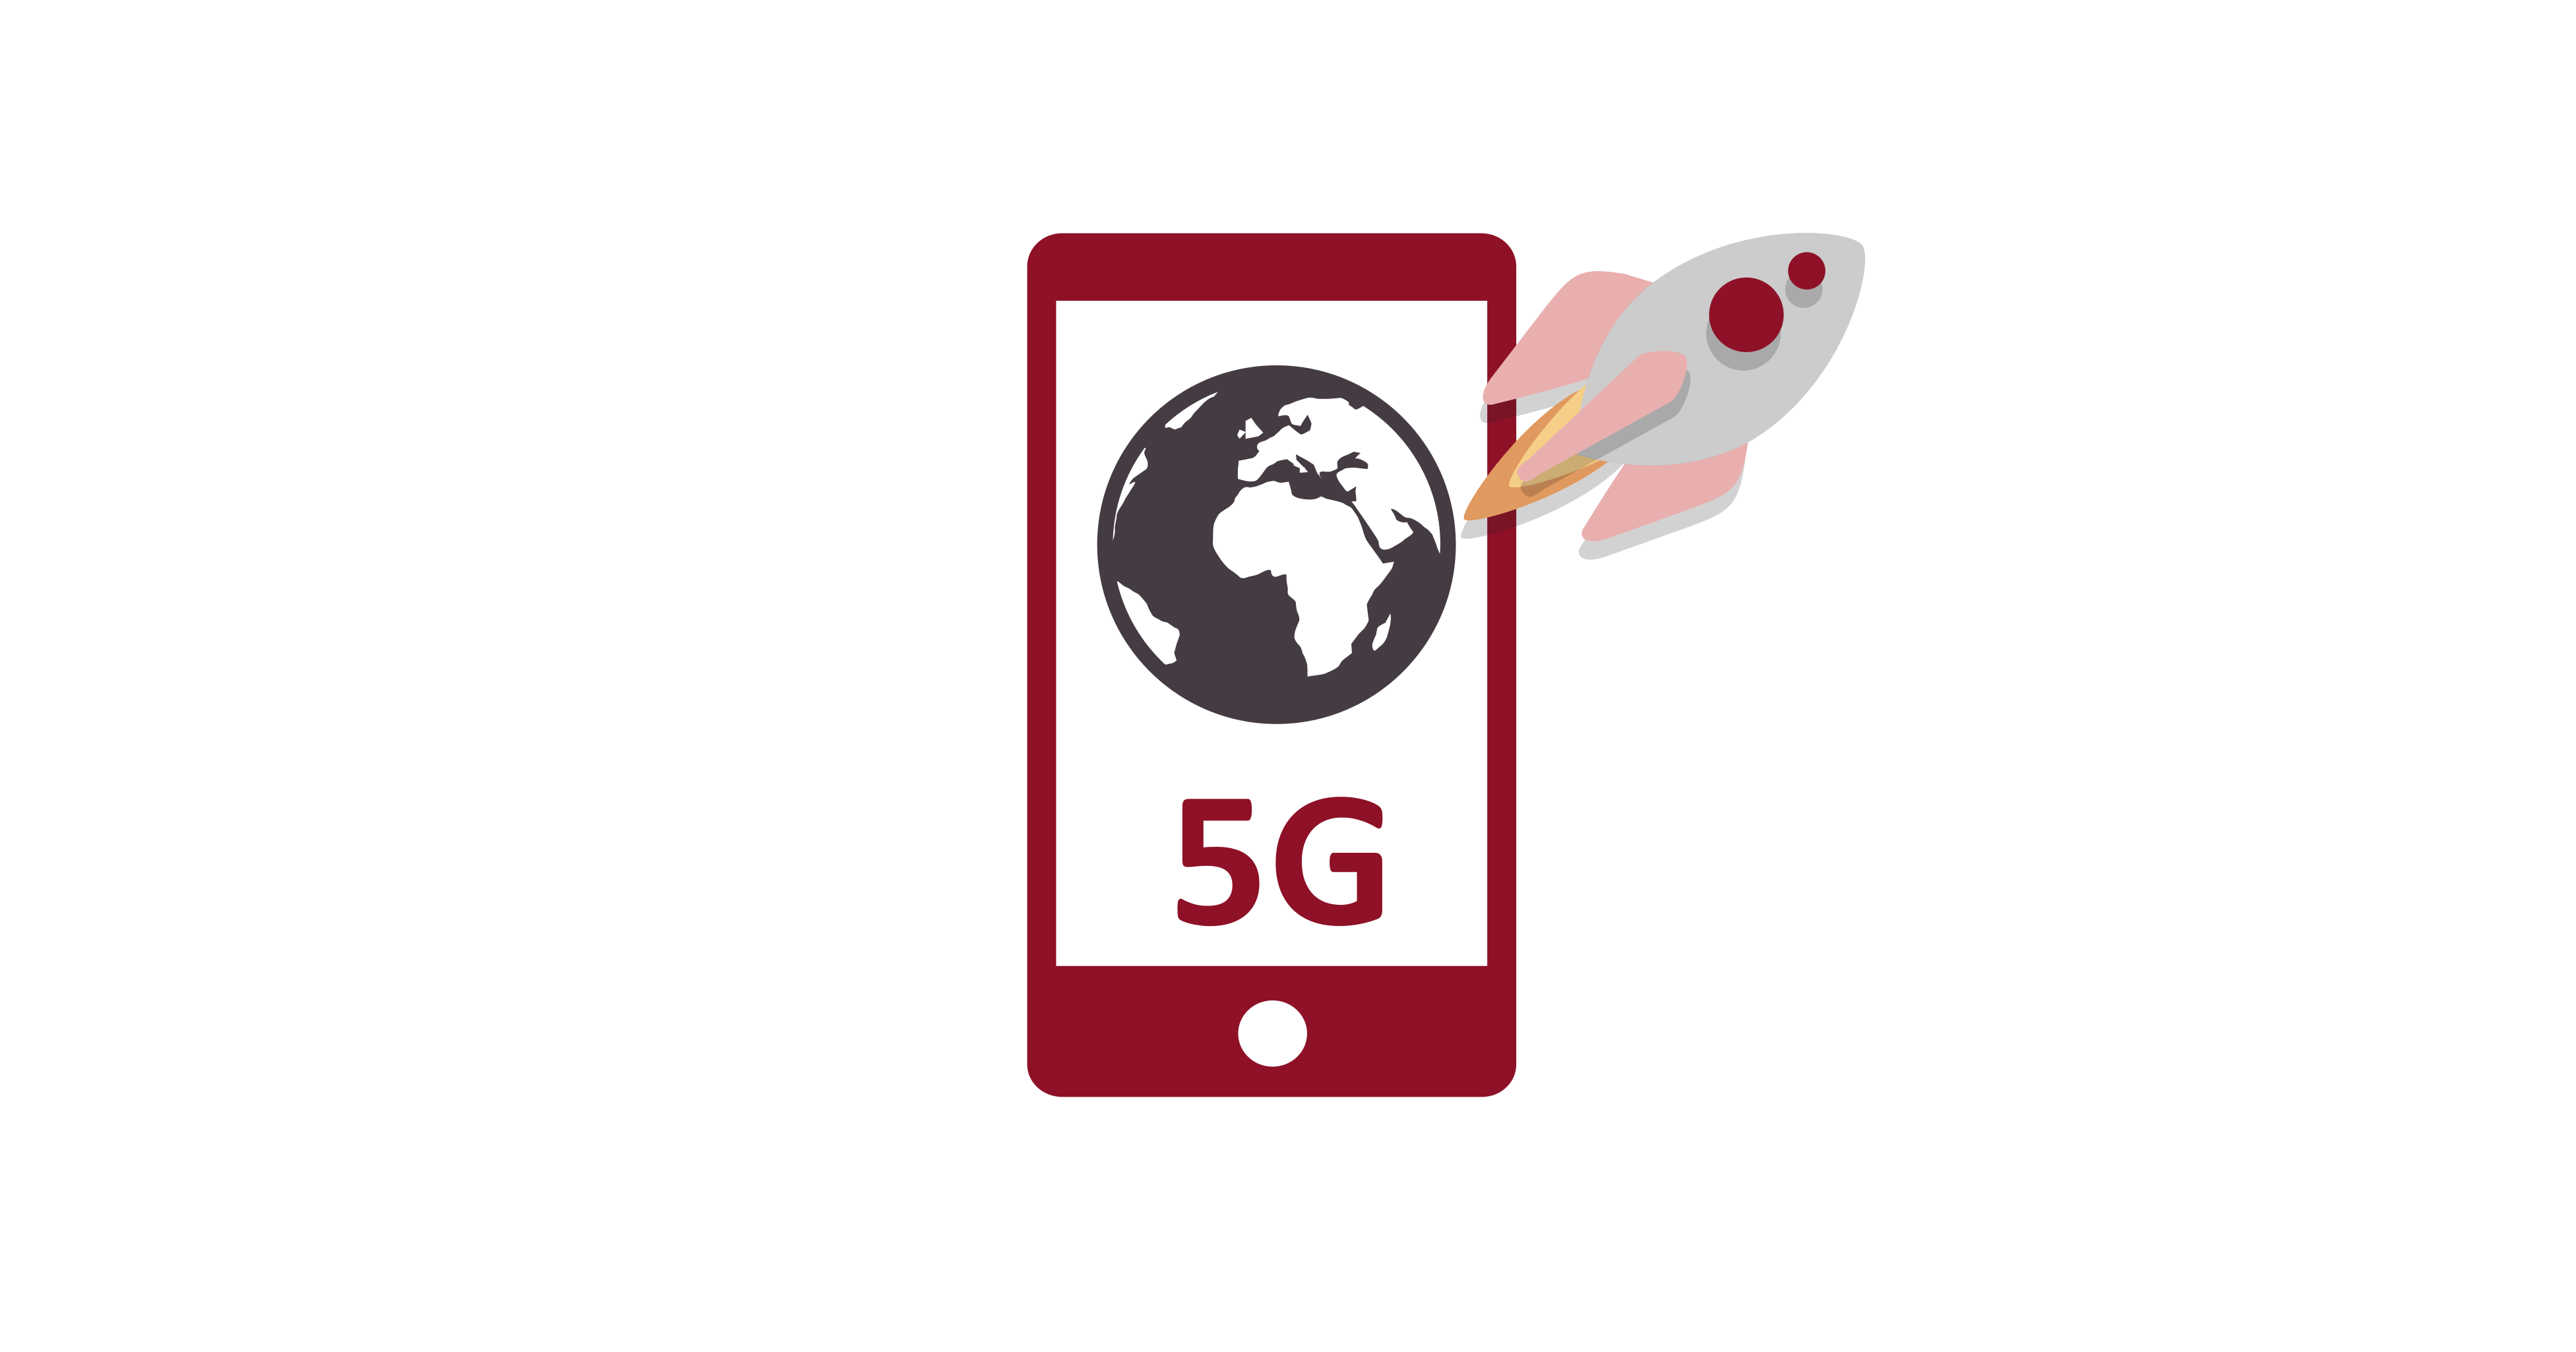 5G service - faster download speeds and more complex mobile internet apps